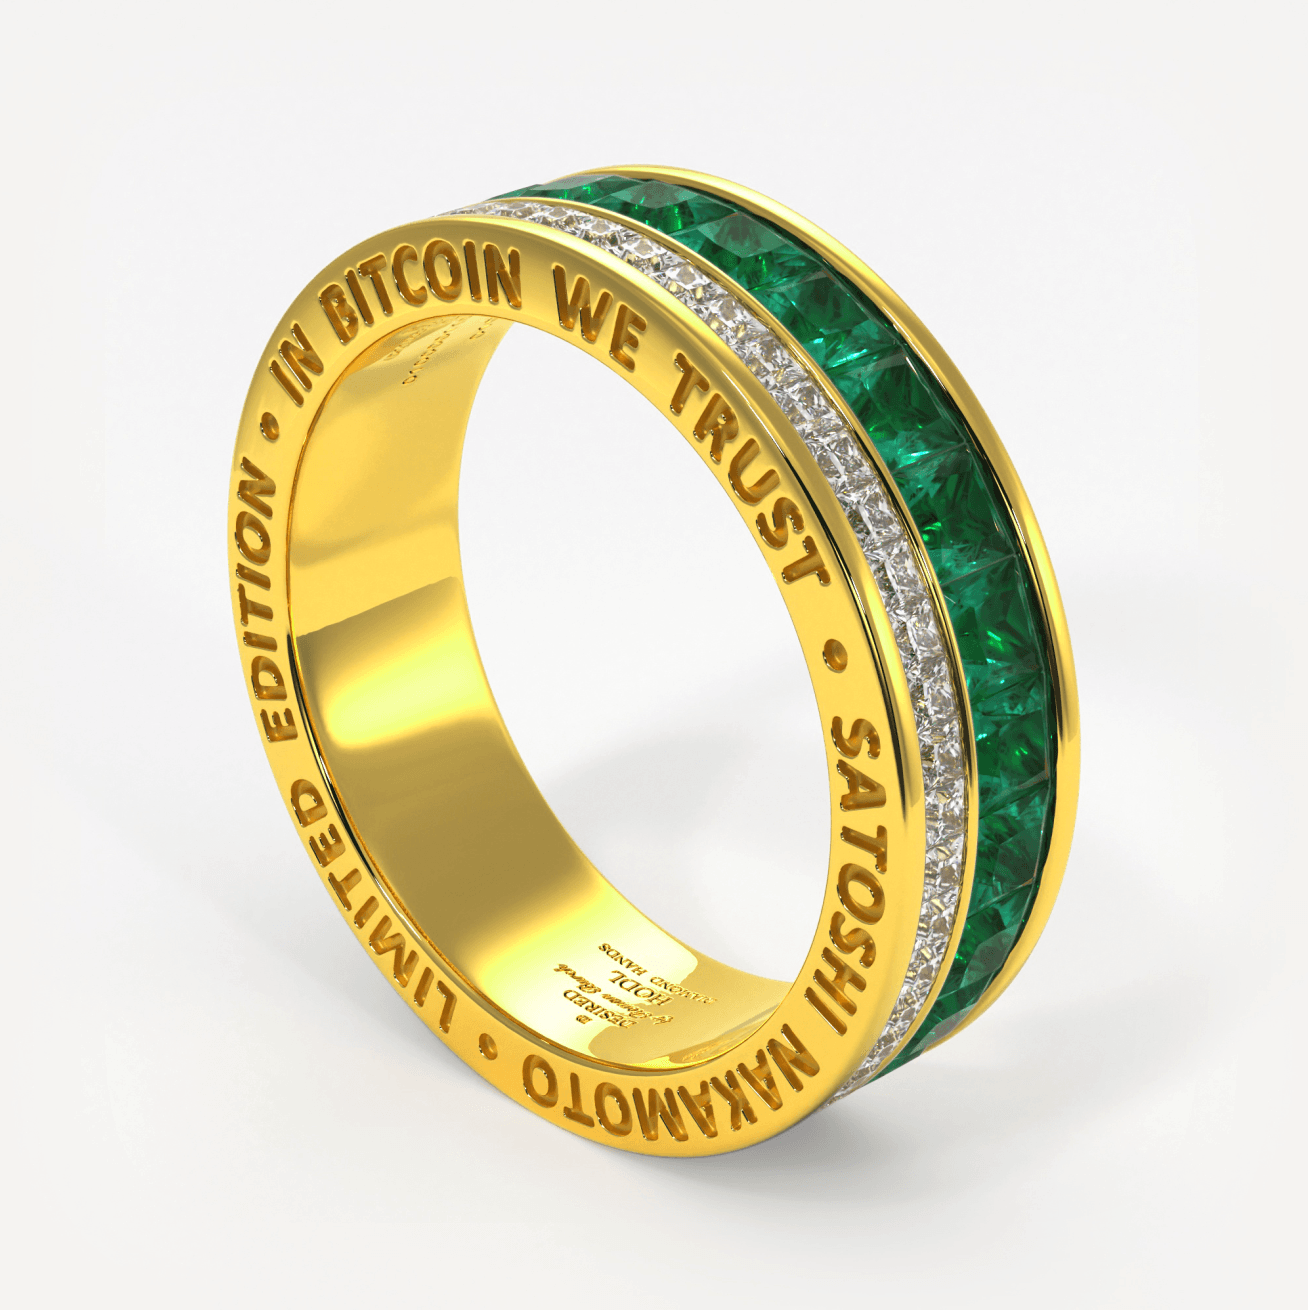 In Bitcoin We Trust 2 way unisex ring  07/100 edition